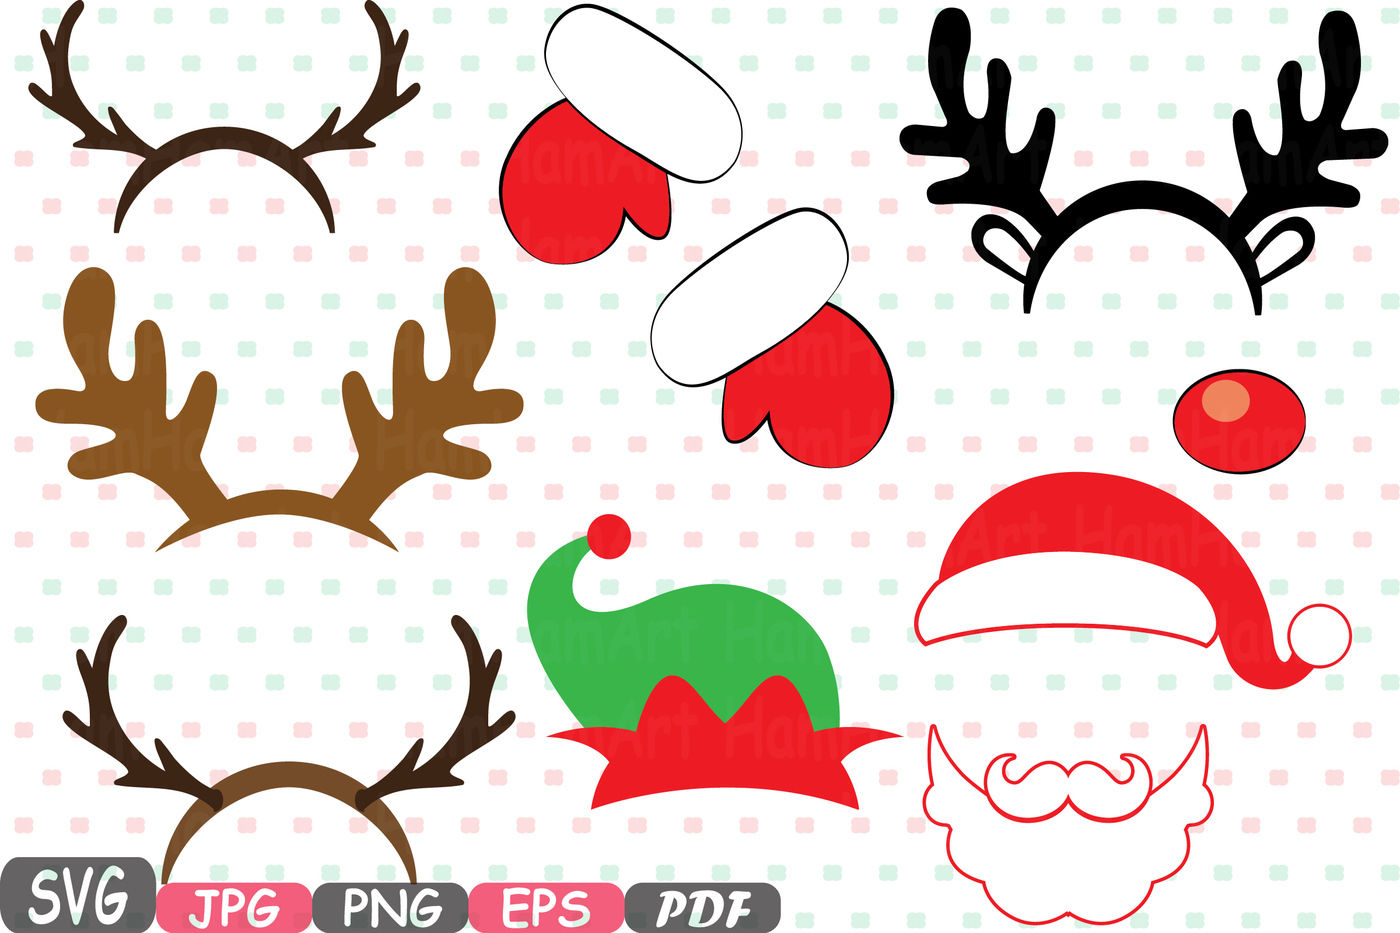 Christmas Props Party Photo Booth Silhouette Costume Cutting Files Svg Horns Clipart Bunting Digital Santa Claus Props Reindeer Vinyl 5p By Hamhamart Thehungryjpeg Com